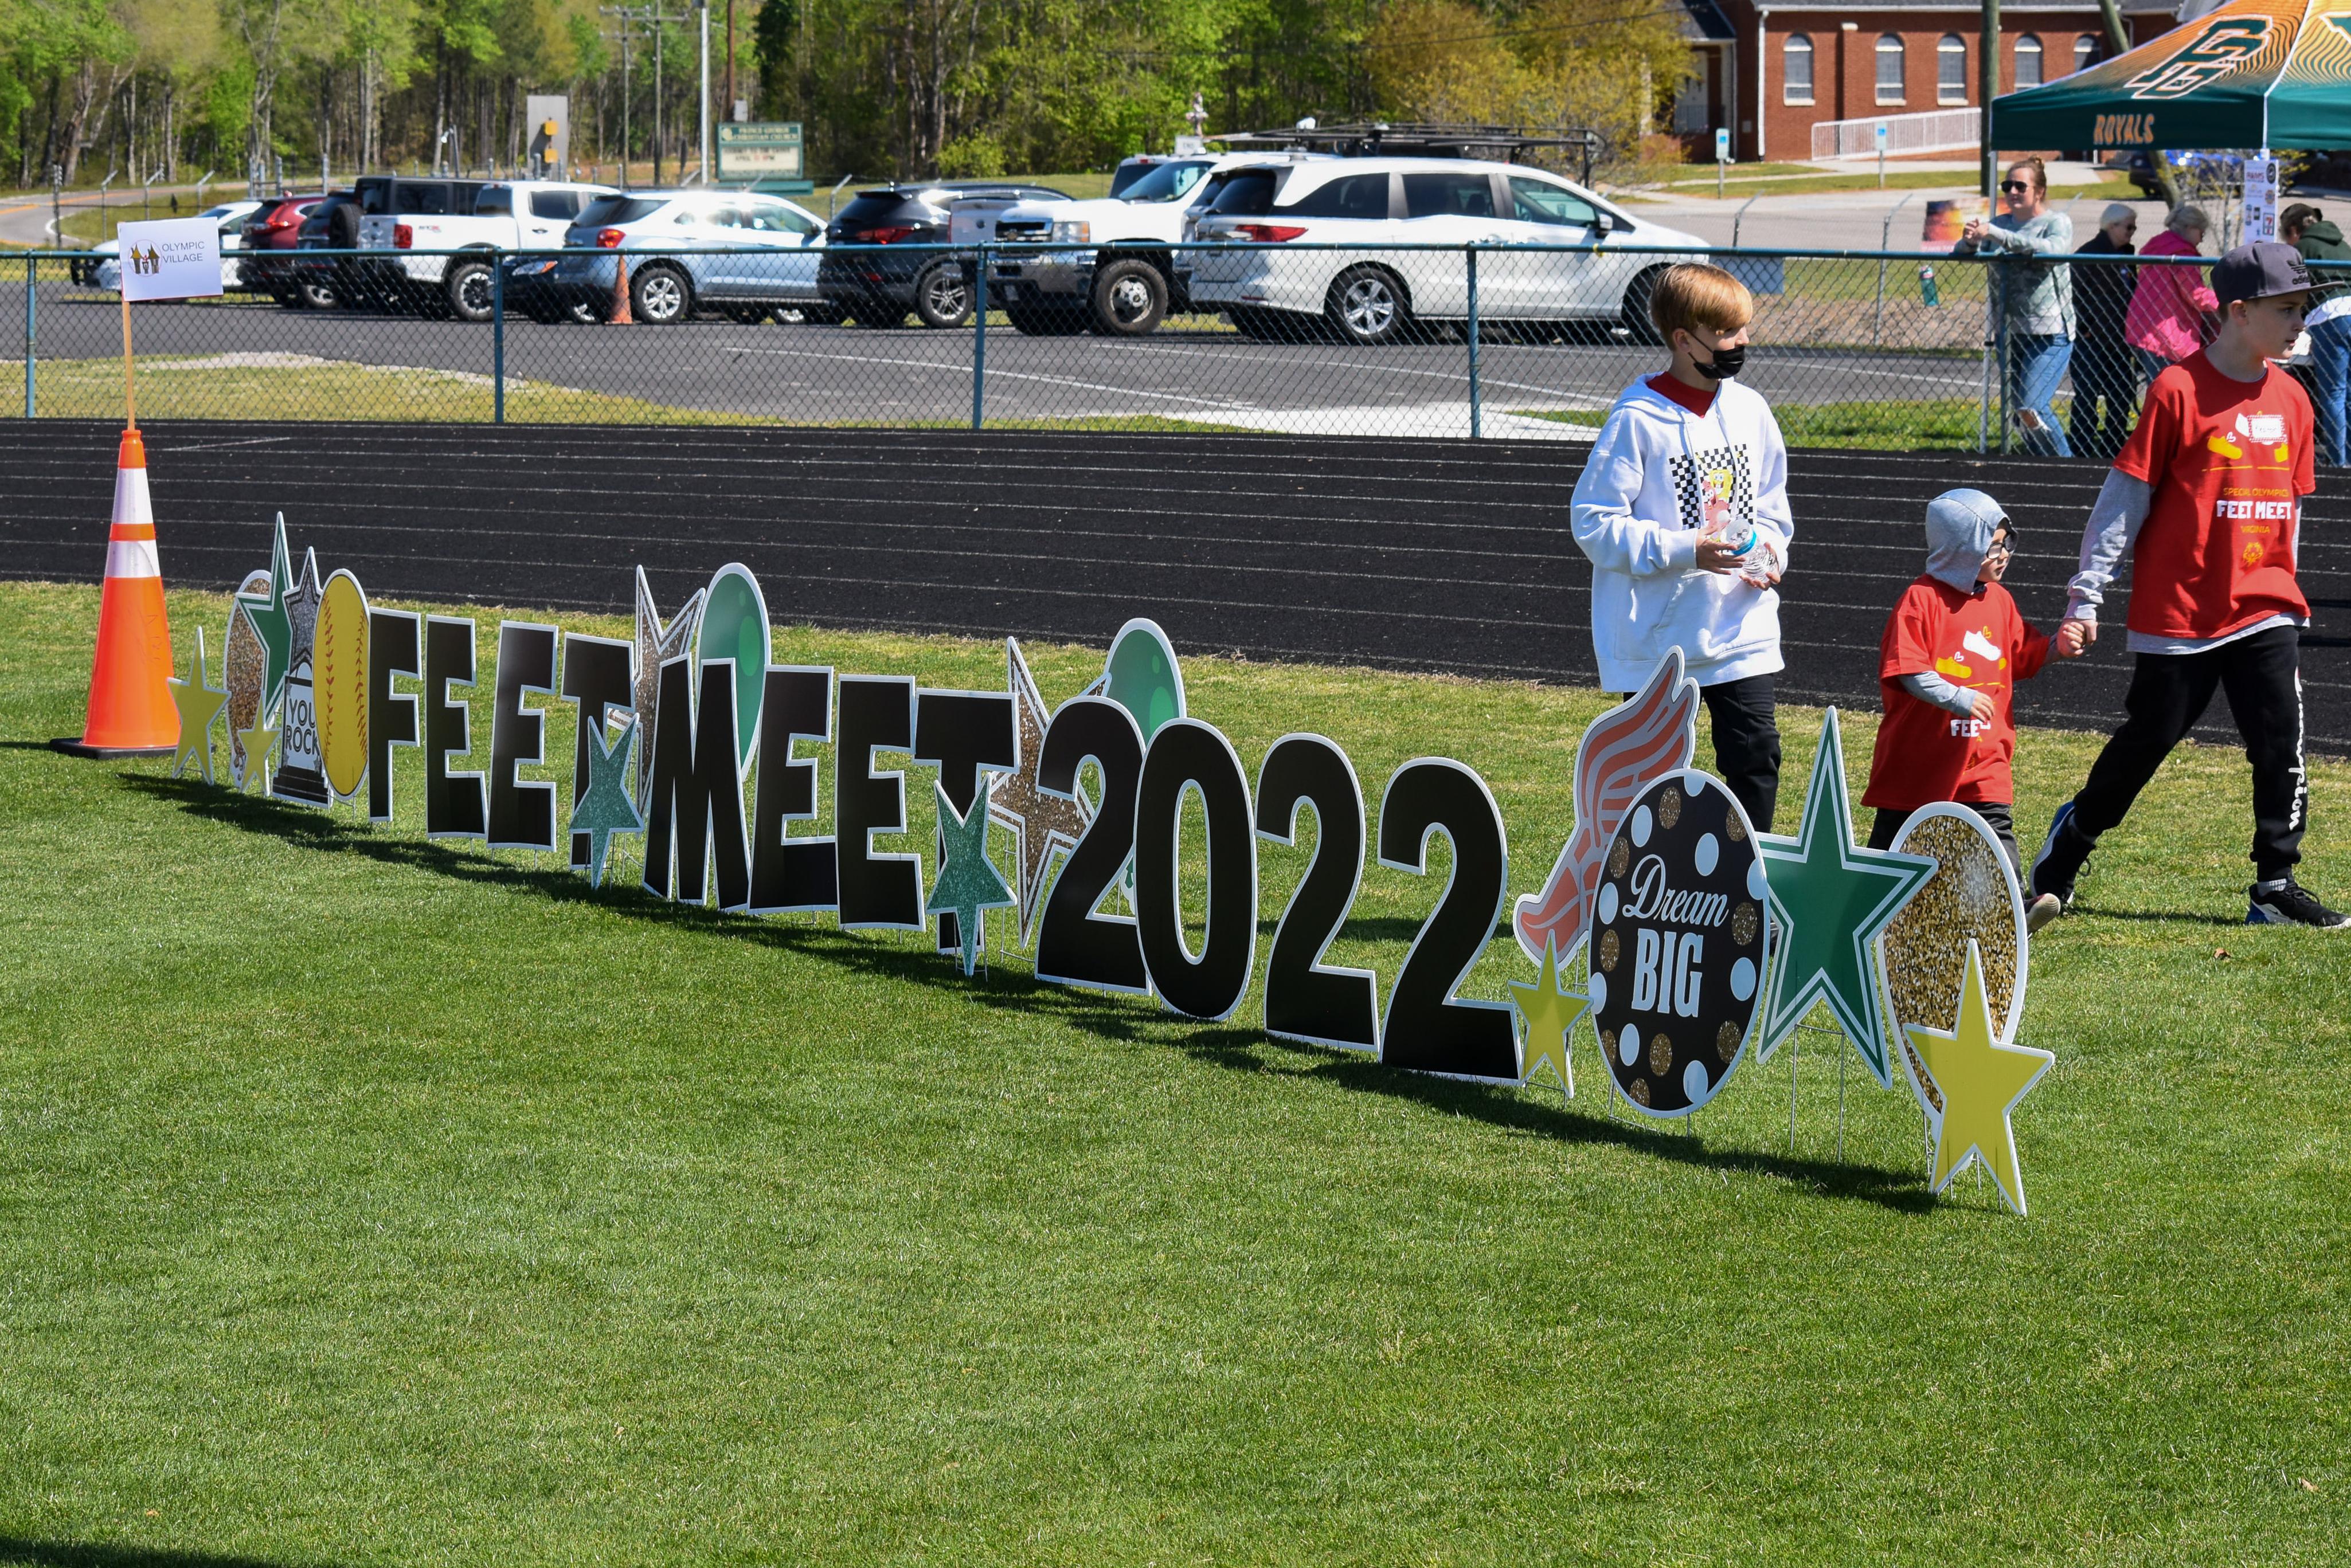 Scenes from the 2022 Feet Meet at Prince George High School Athletic Field